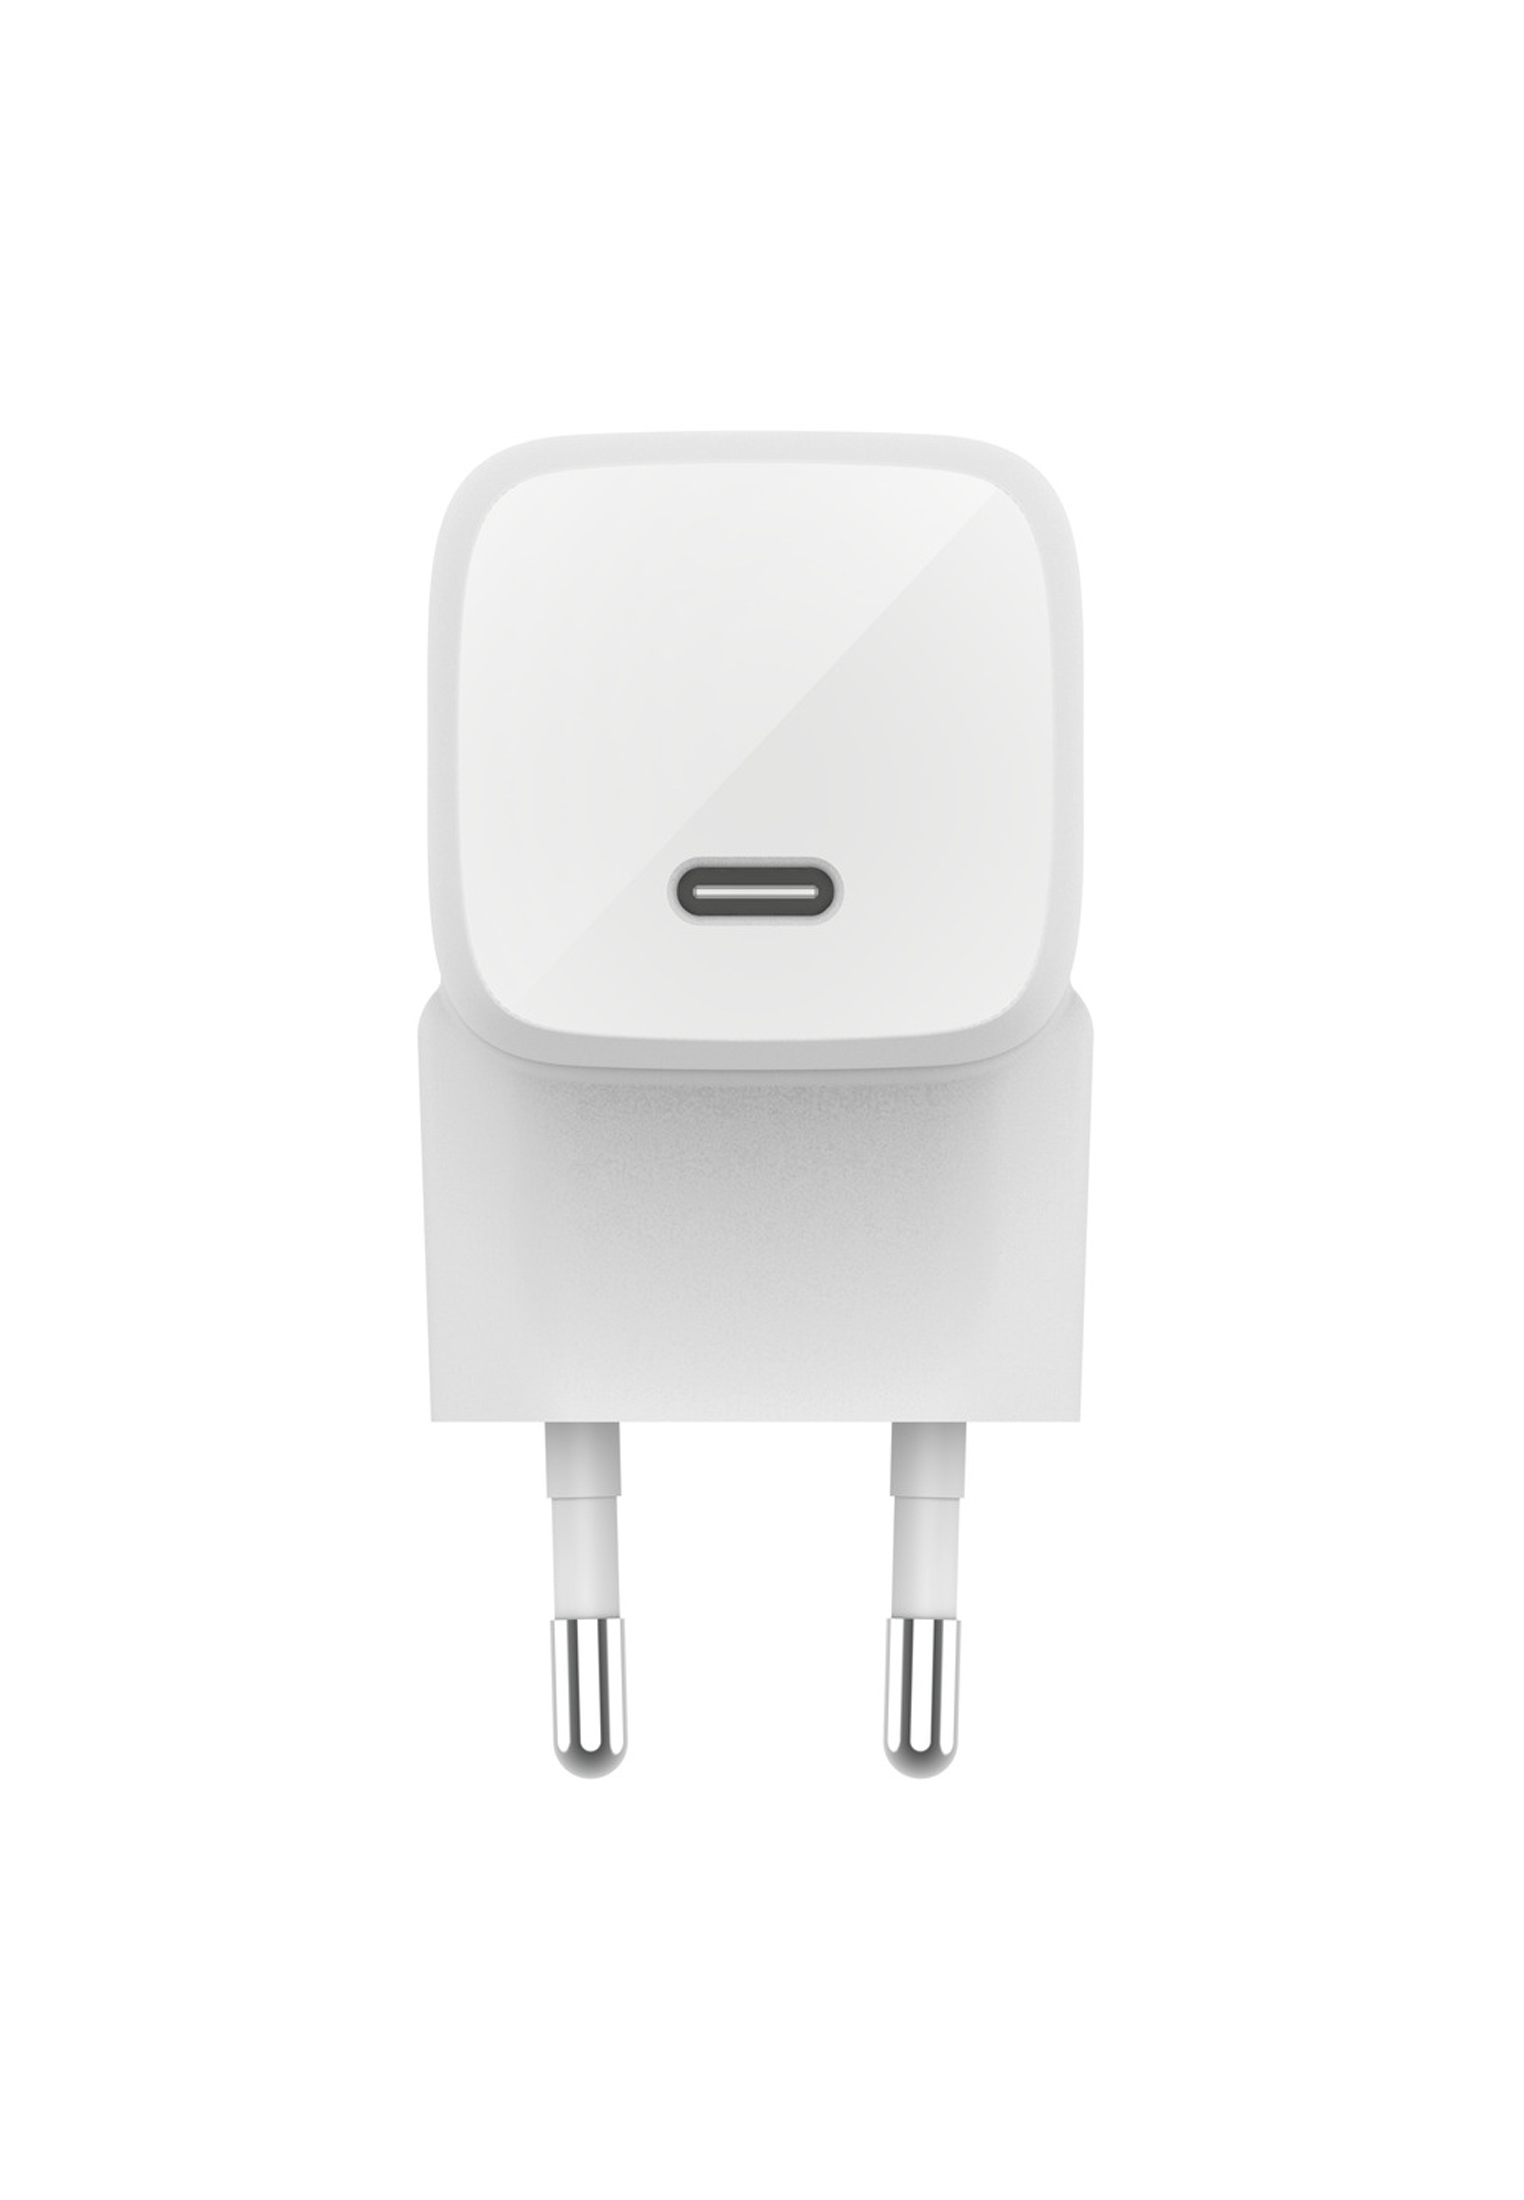 BELKIN weiß BOOST 230 USB-C Apple, Volt, Charger CHARGE™ Samsung,